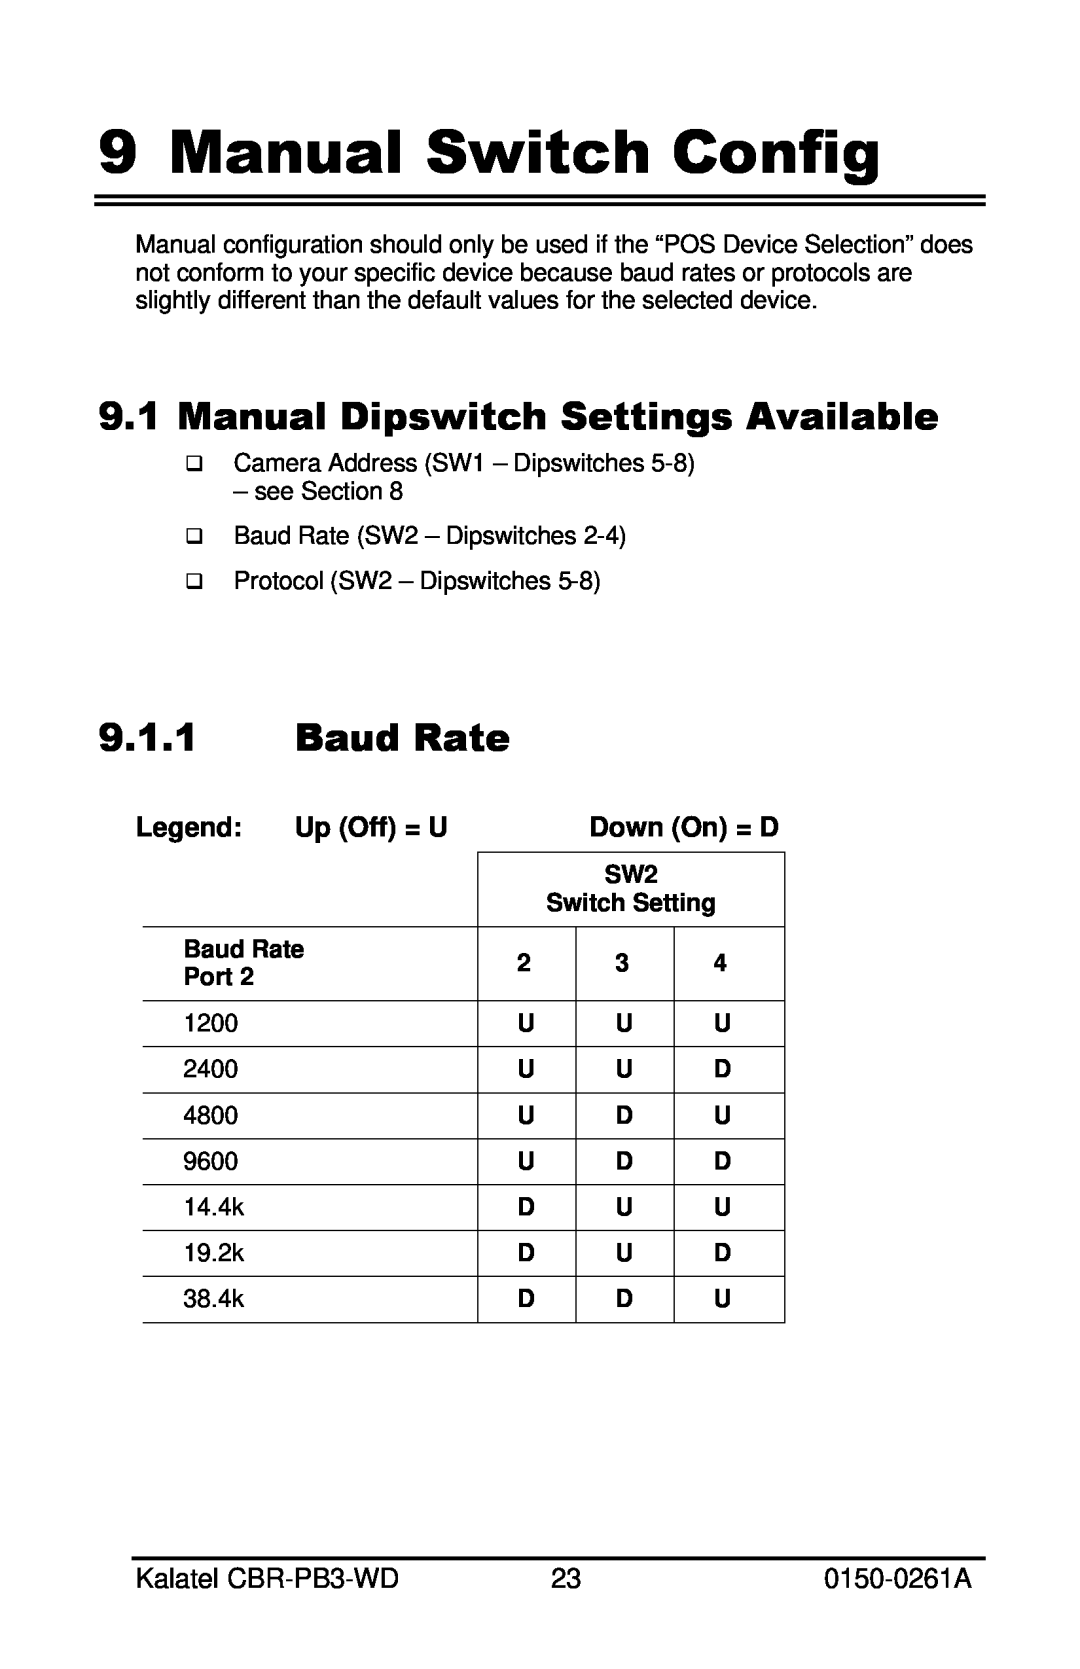 GE CBR-PB3-WD installation manual Manual Switch Config, Manual Dipswitch Settings Available, Baud Rate 